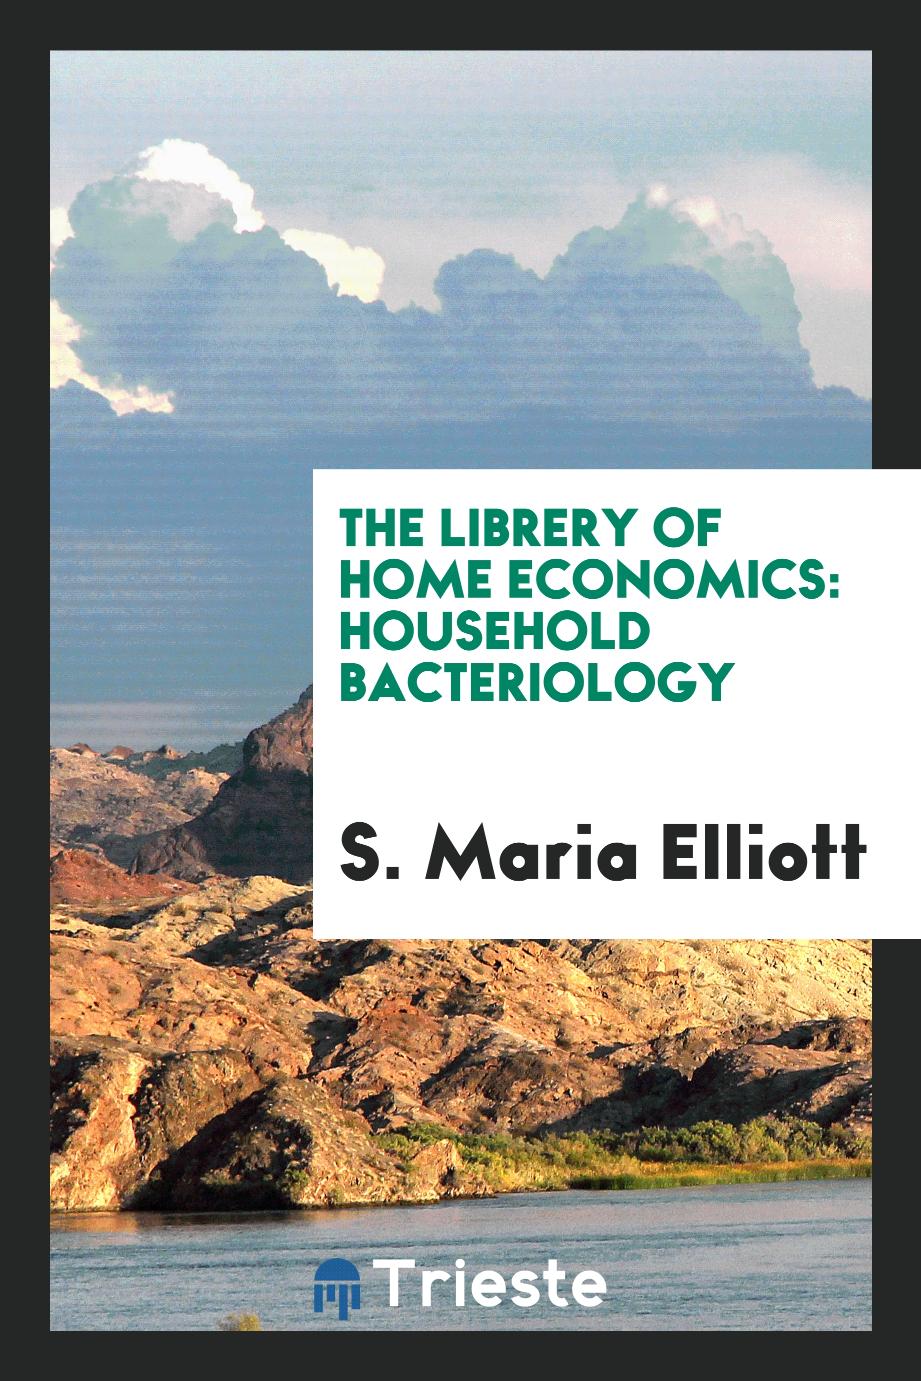 The Librery of Home Economics: Household Bacteriology